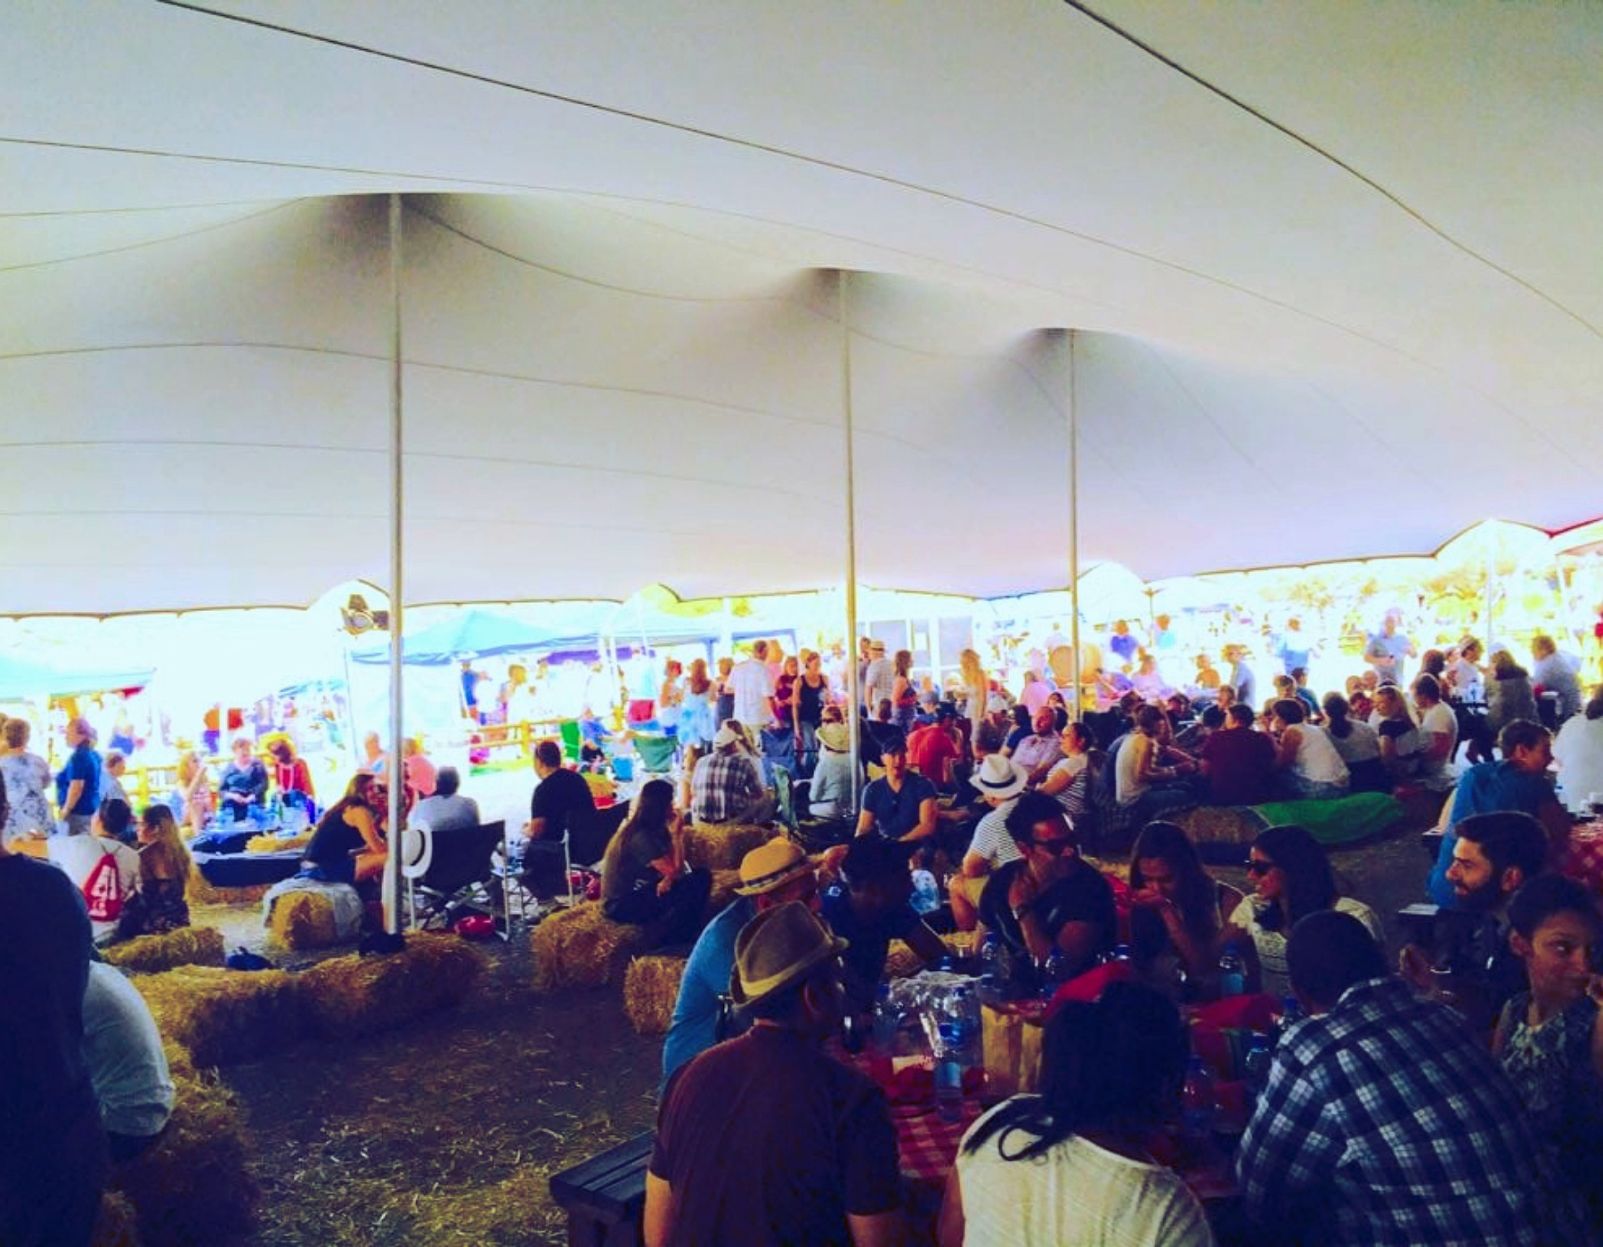 Crowd At A Wine Festival Seated Under A Large White Stretch Tent.